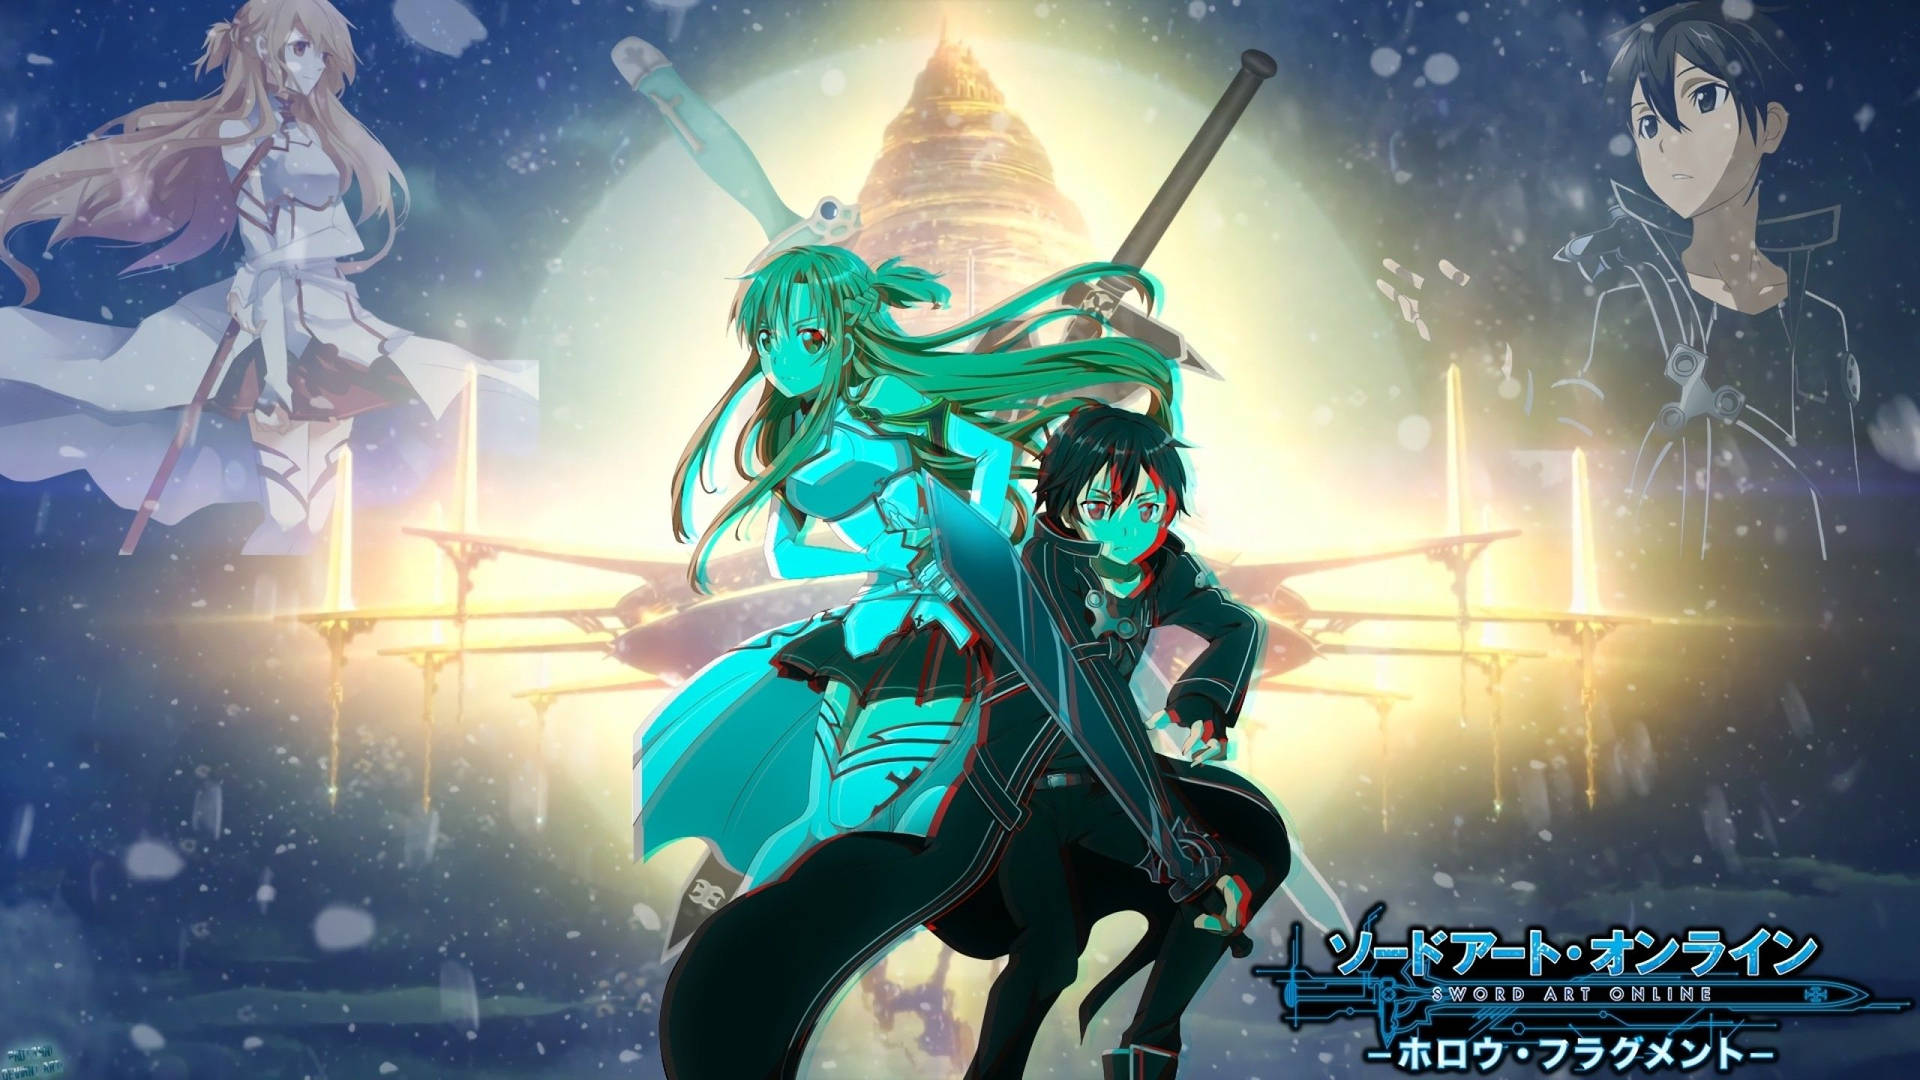 Kirito and Asuna stride hand-in-hand together in this magical Sword Art Online moment. Wallpaper